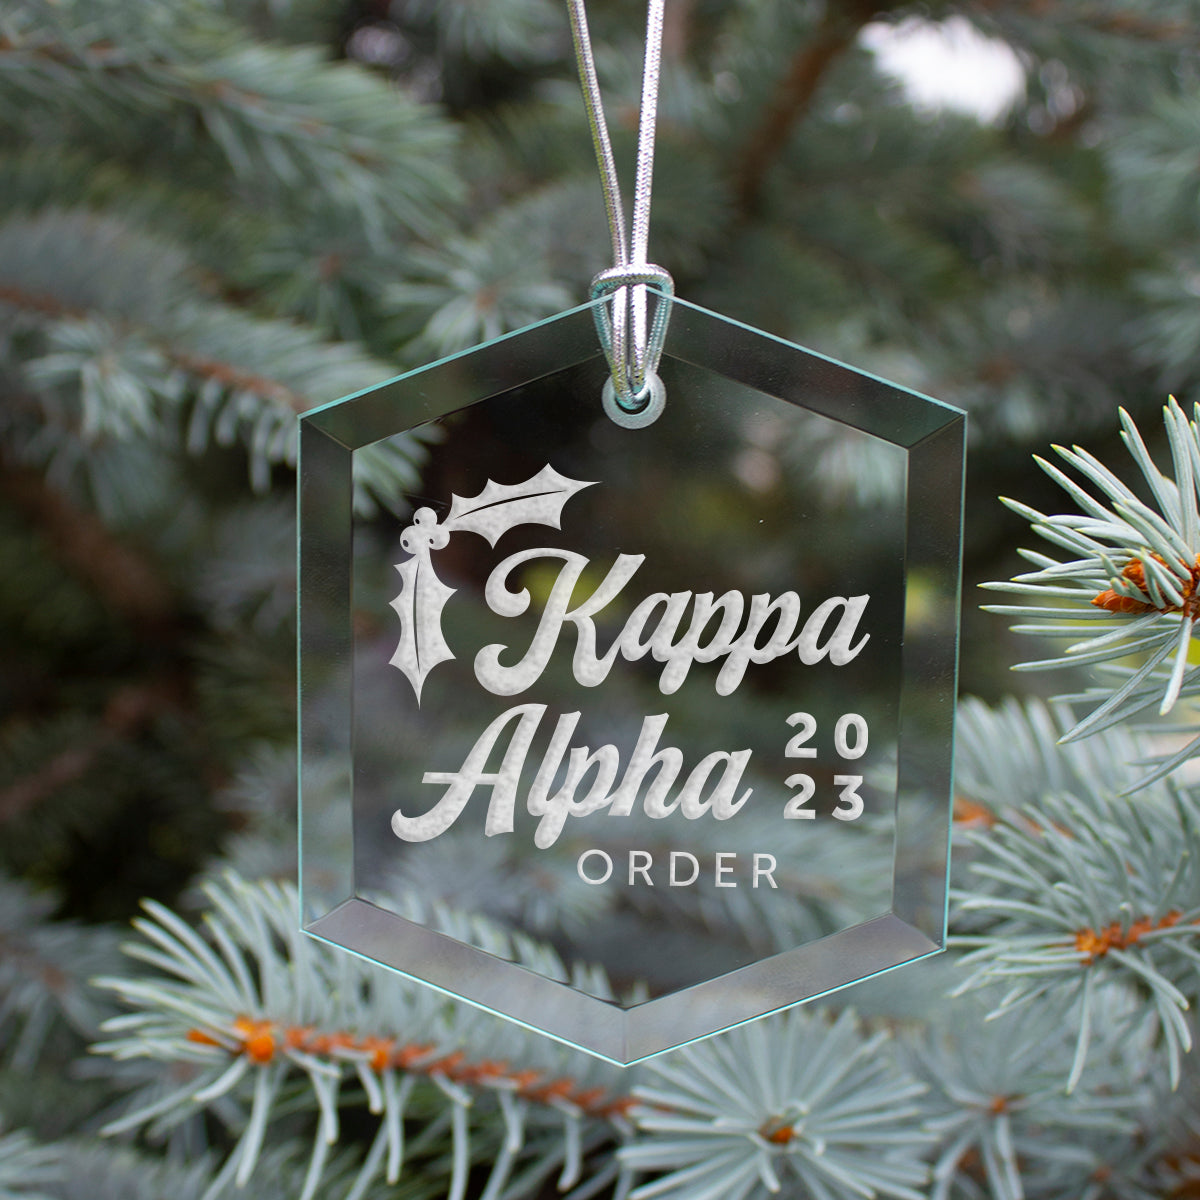 New! Kappa Alpha 2023 Limited Edition Holiday Ornament